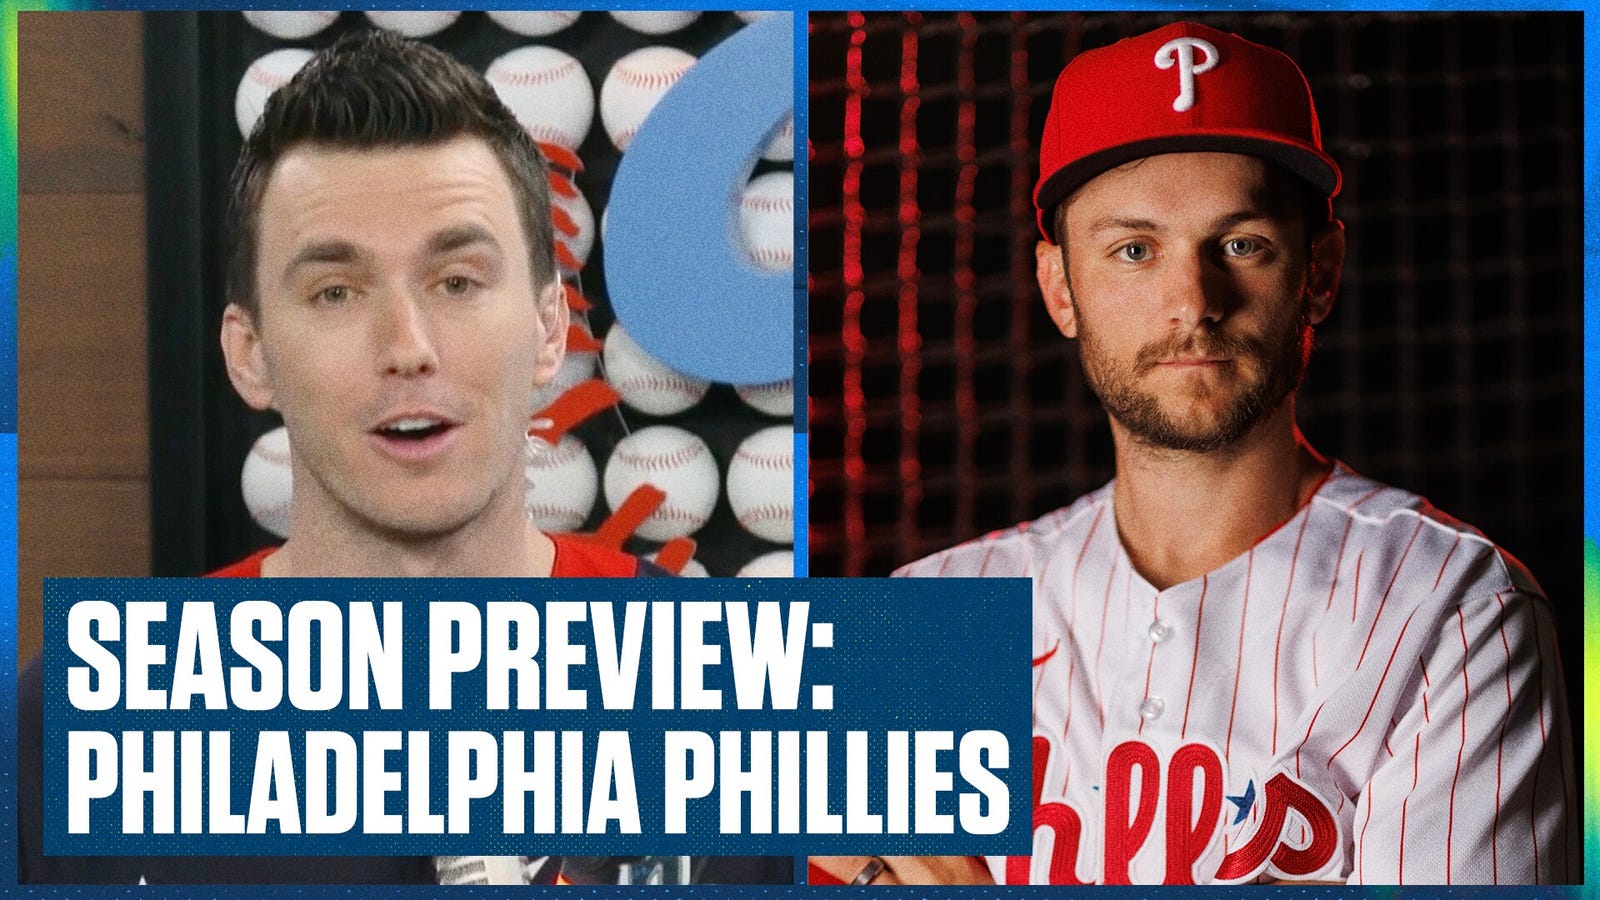 Phillies Season Preview: Will the lineup get them to the World Series?